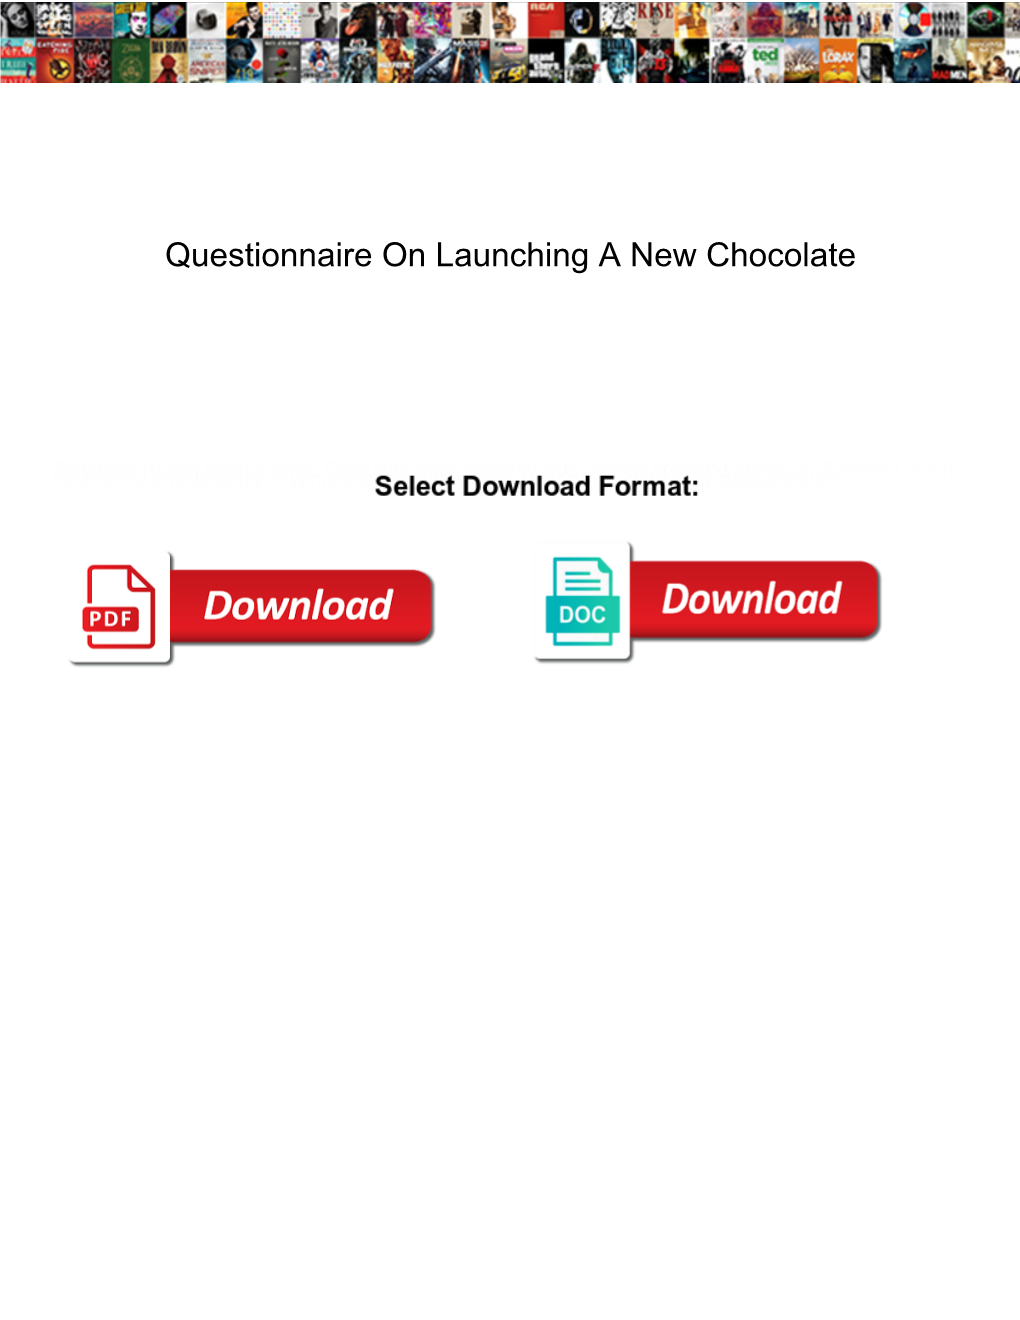 Questionnaire on Launching a New Chocolate